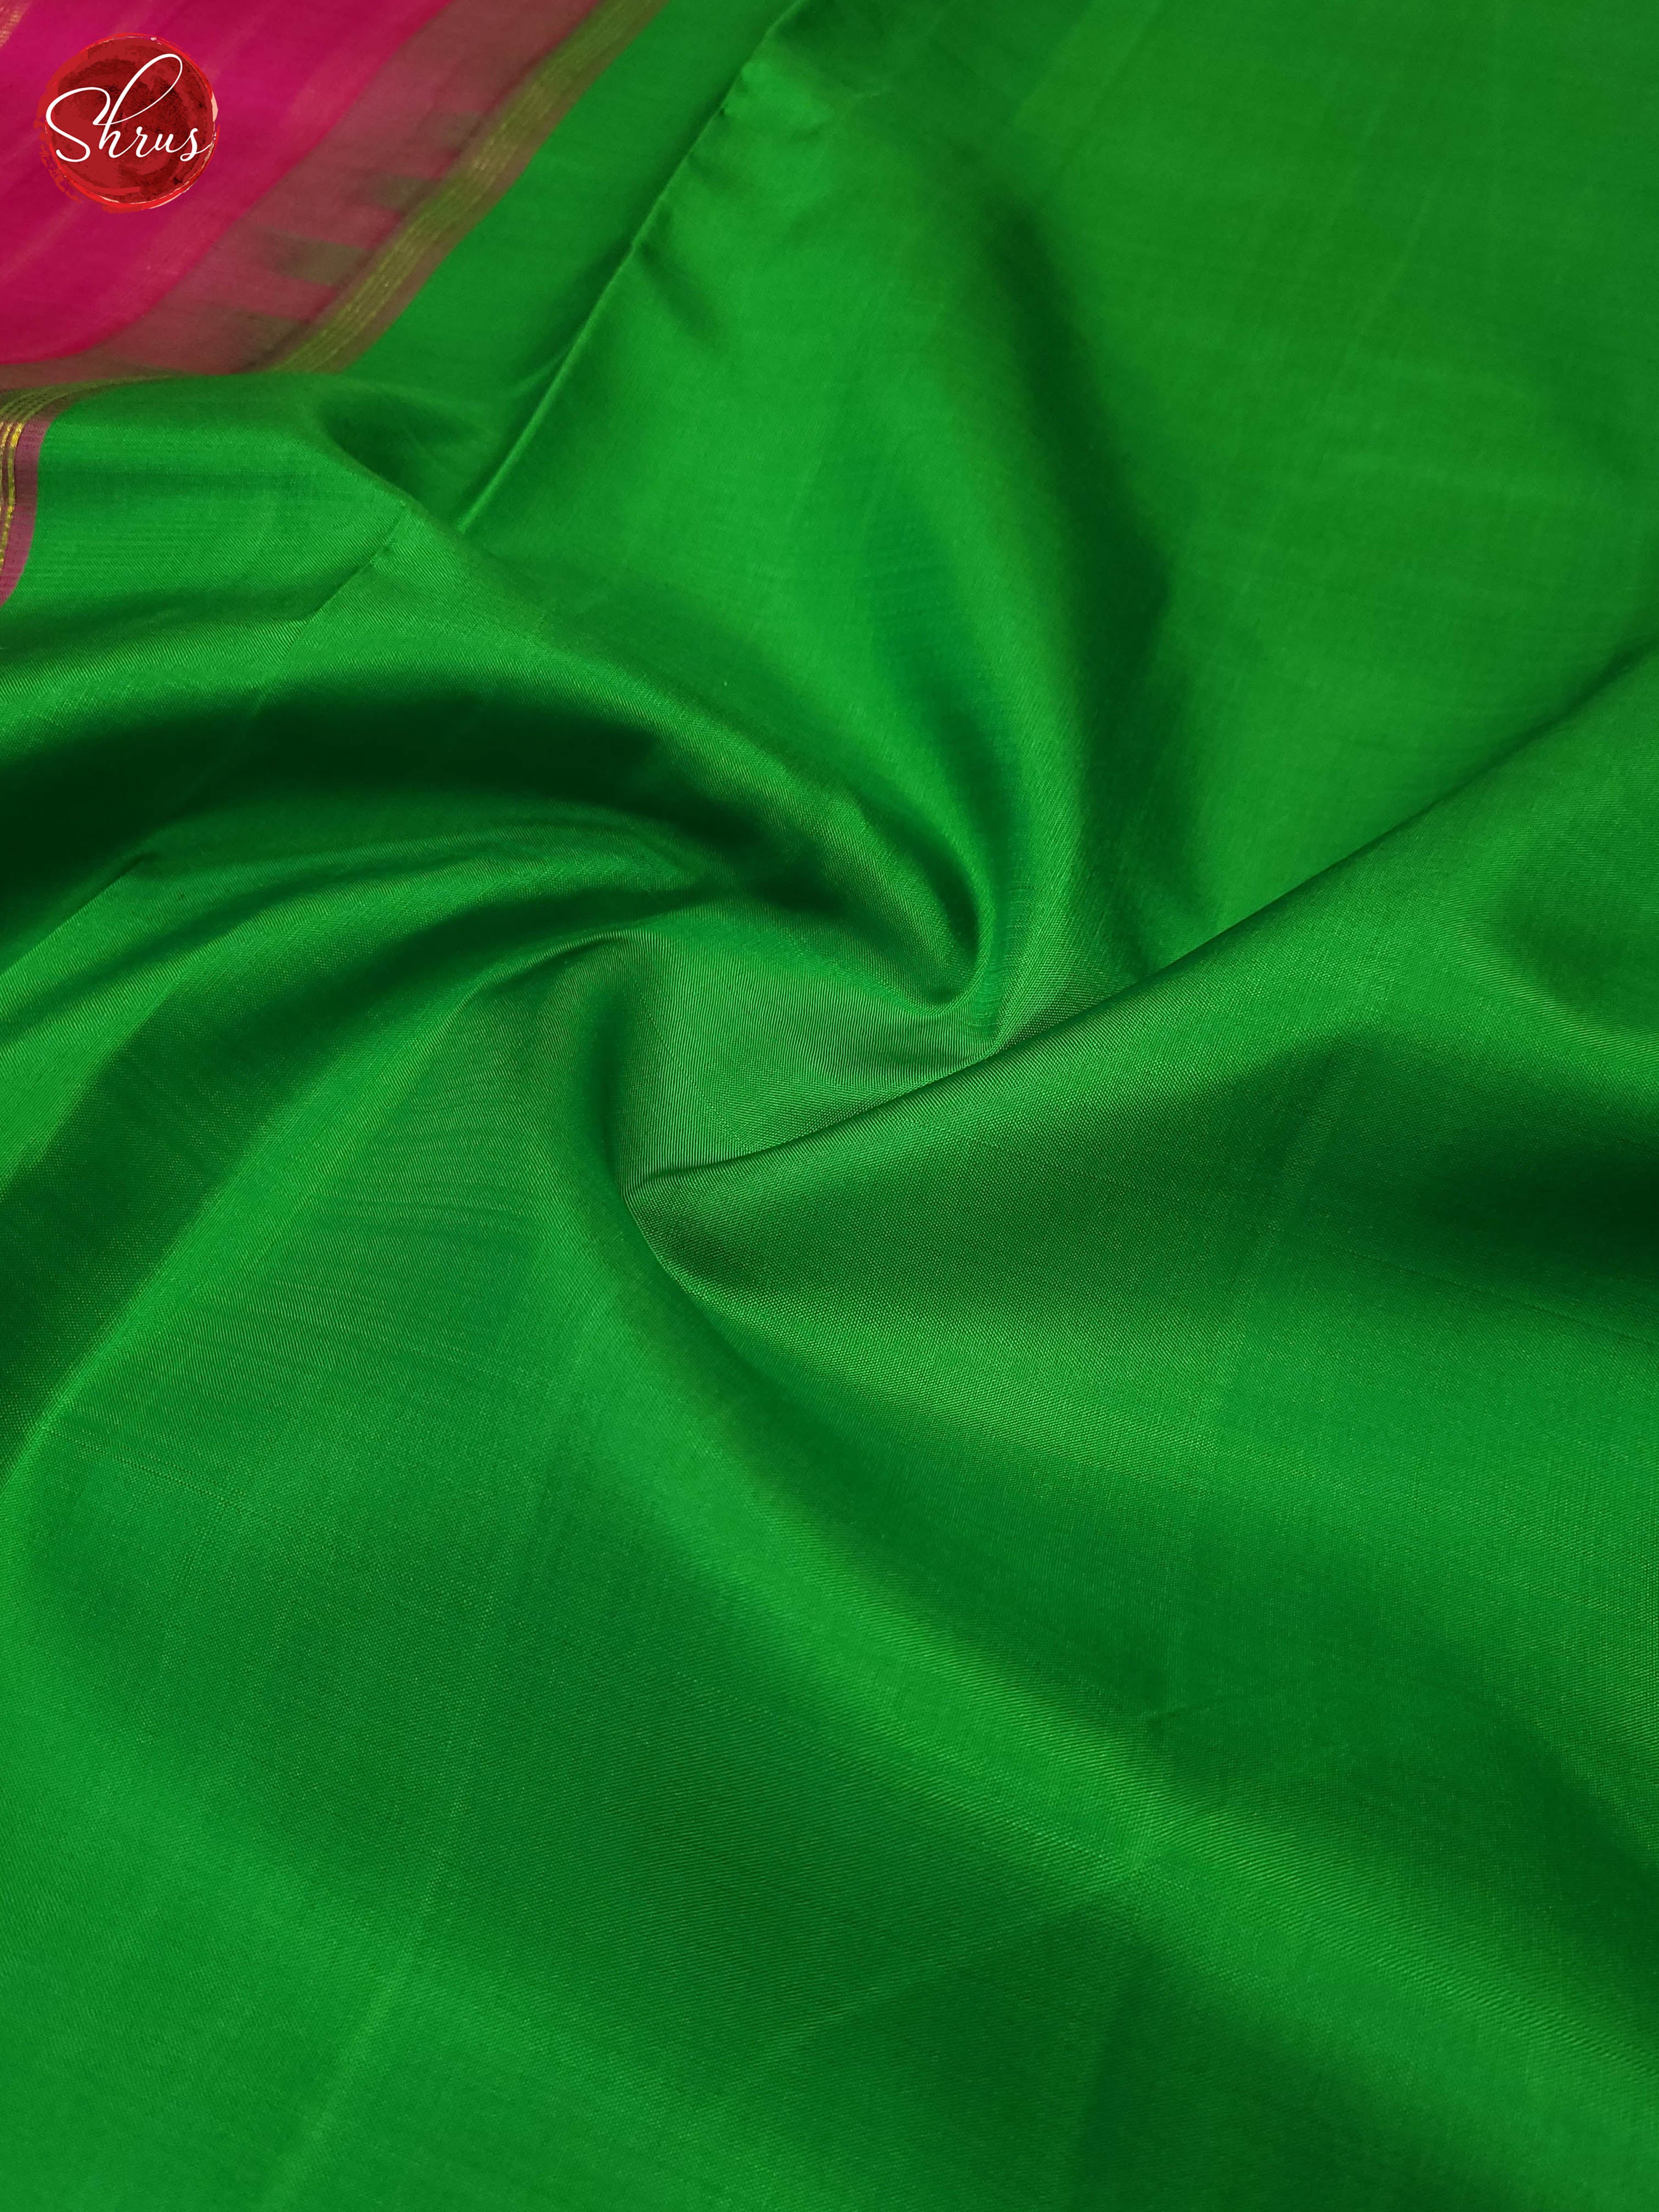 Green and pink - Shop on ShrusEternity.com